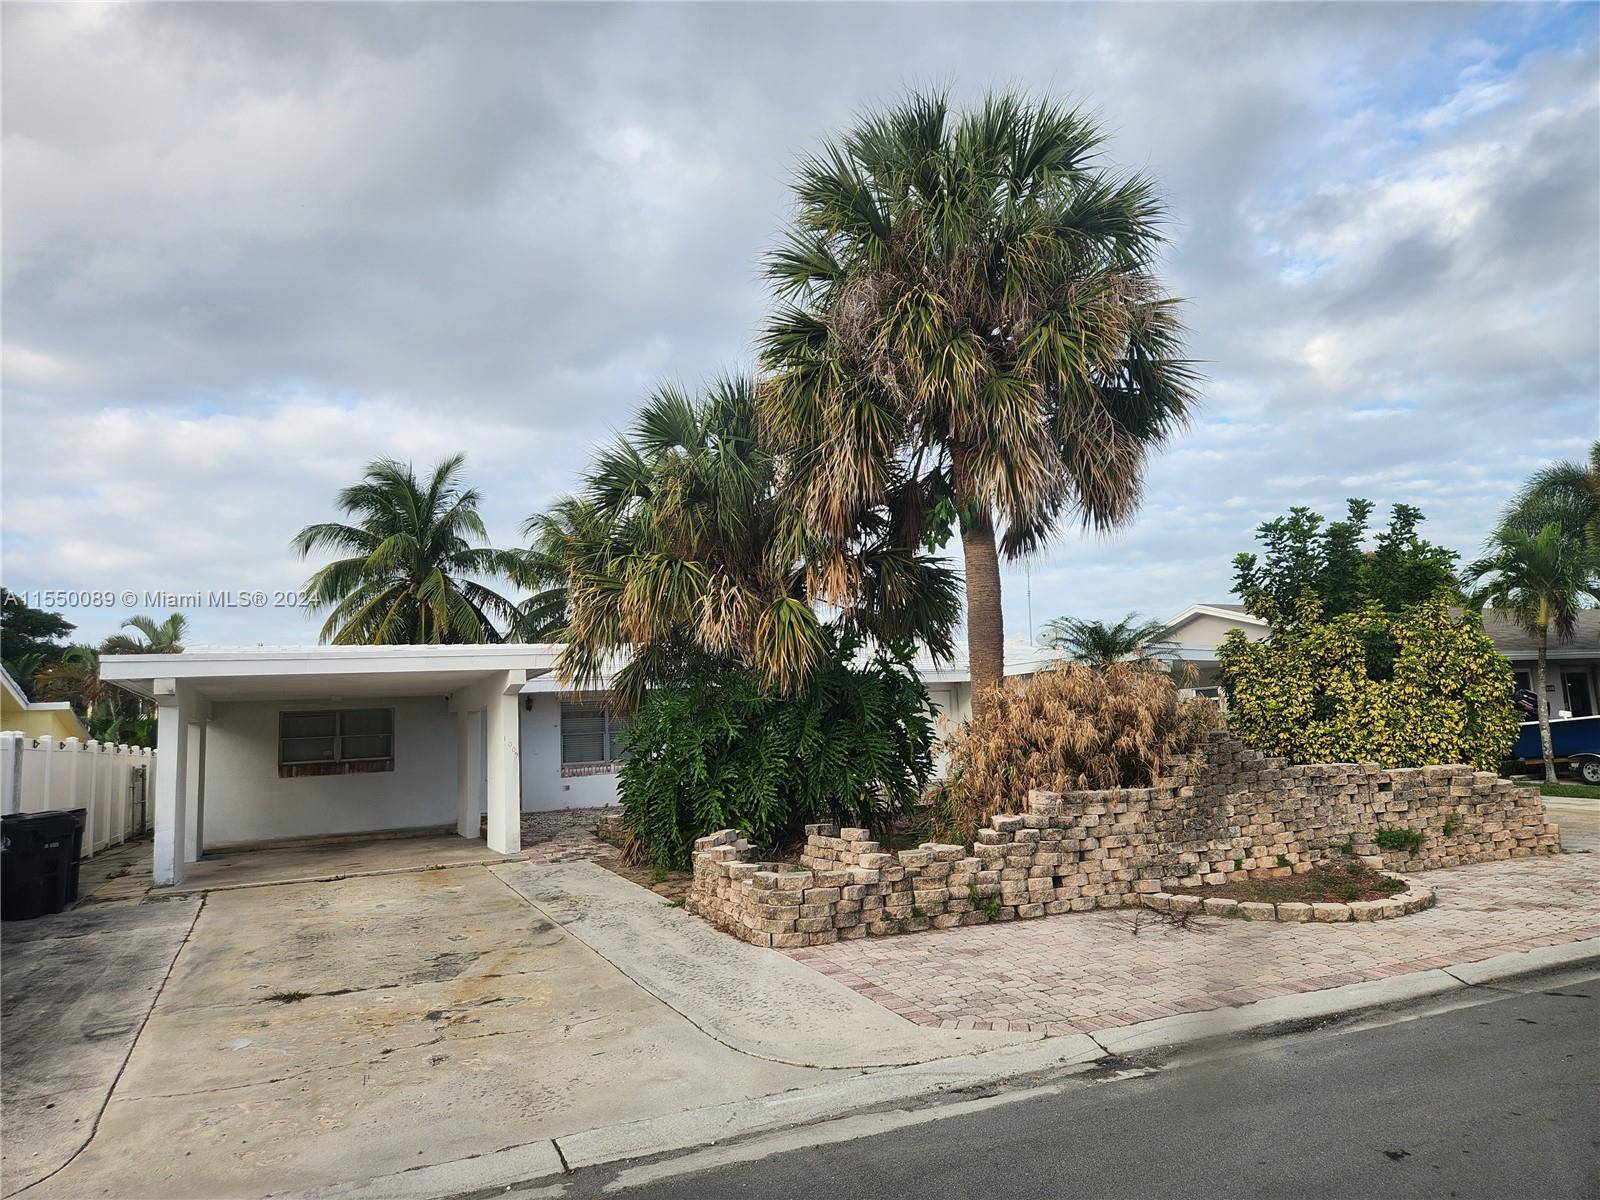 RAREST DUPLEX FIXXER UPPER ON WIDE 120' FT PLUS DEEPEST CANAL IN AREA W THE ONLY EAST END TURN POOL FOR YACHTS SAILBOATS DAVIE BLVD BRIDGE OPENS TO LAS OLAS ...